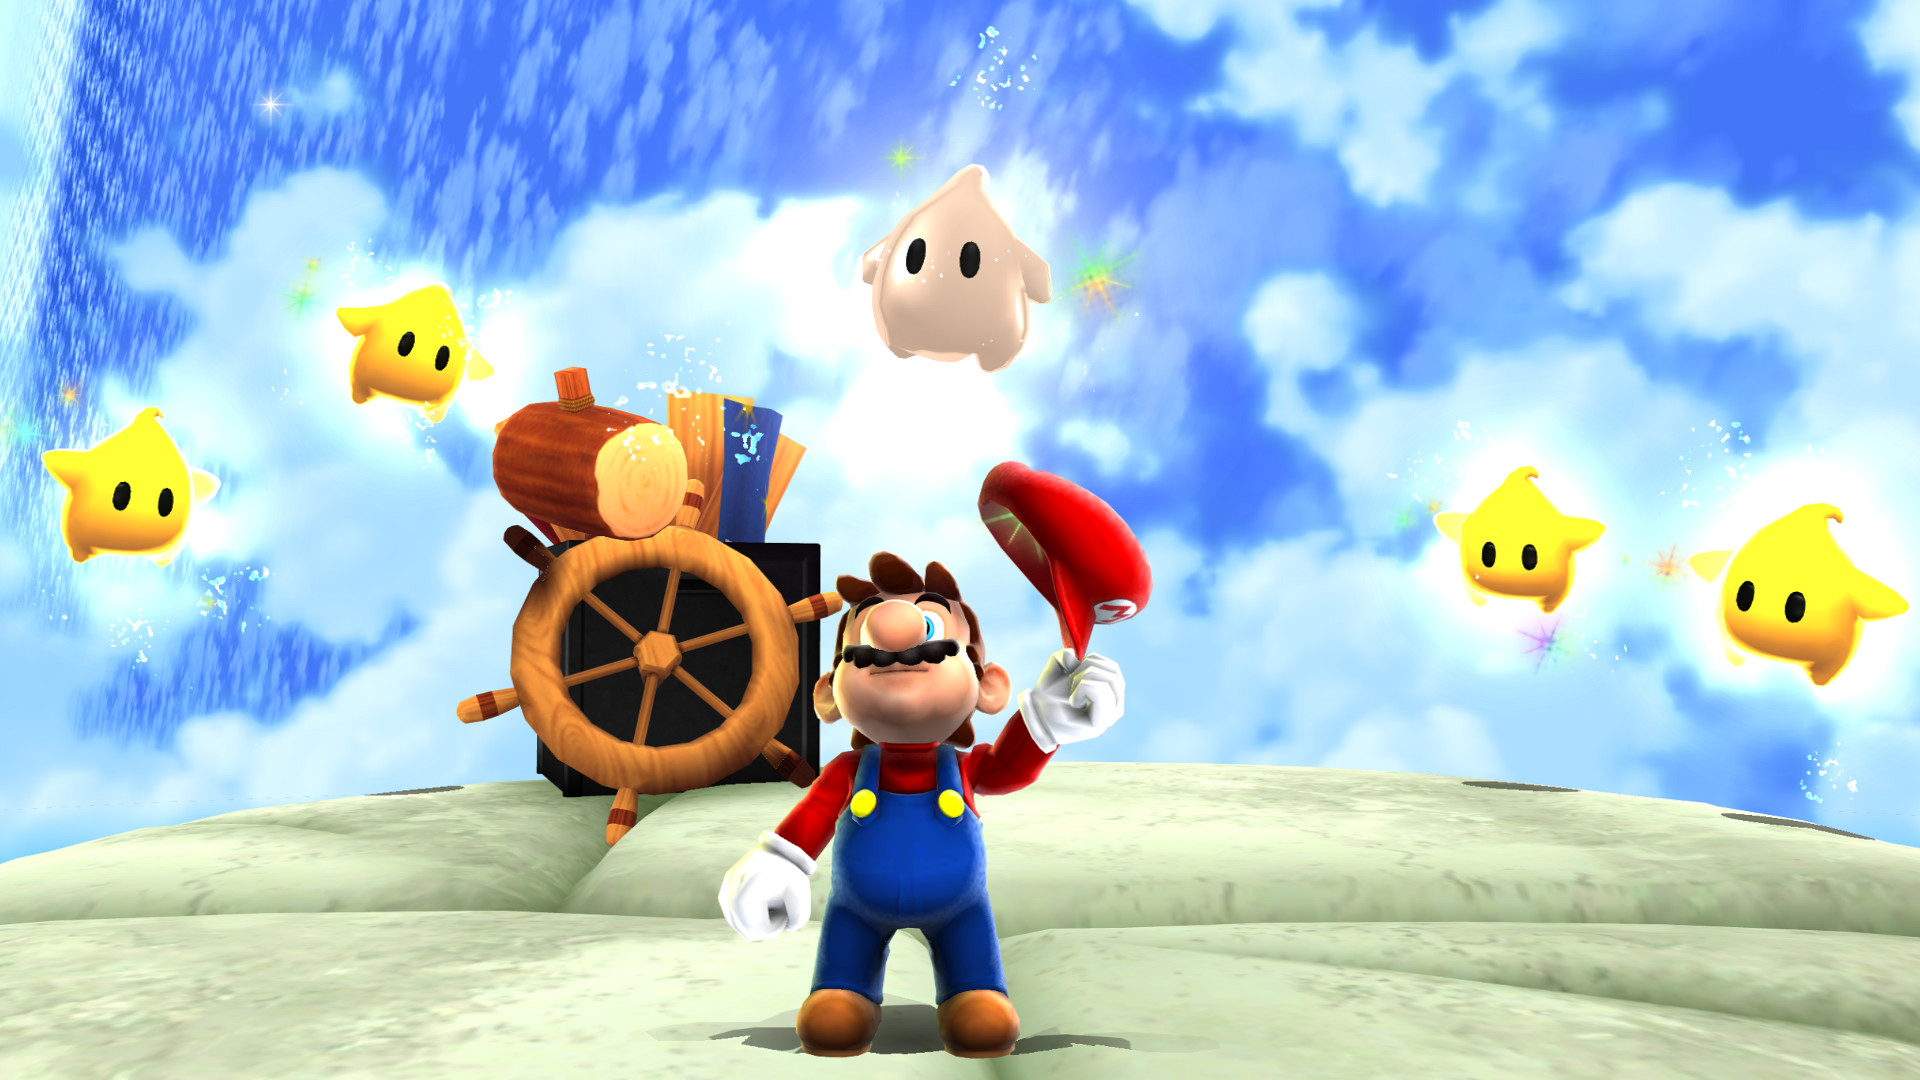 1920x1080 Amazing Super Mario Galaxy 2 Pictures & Backgrounds.